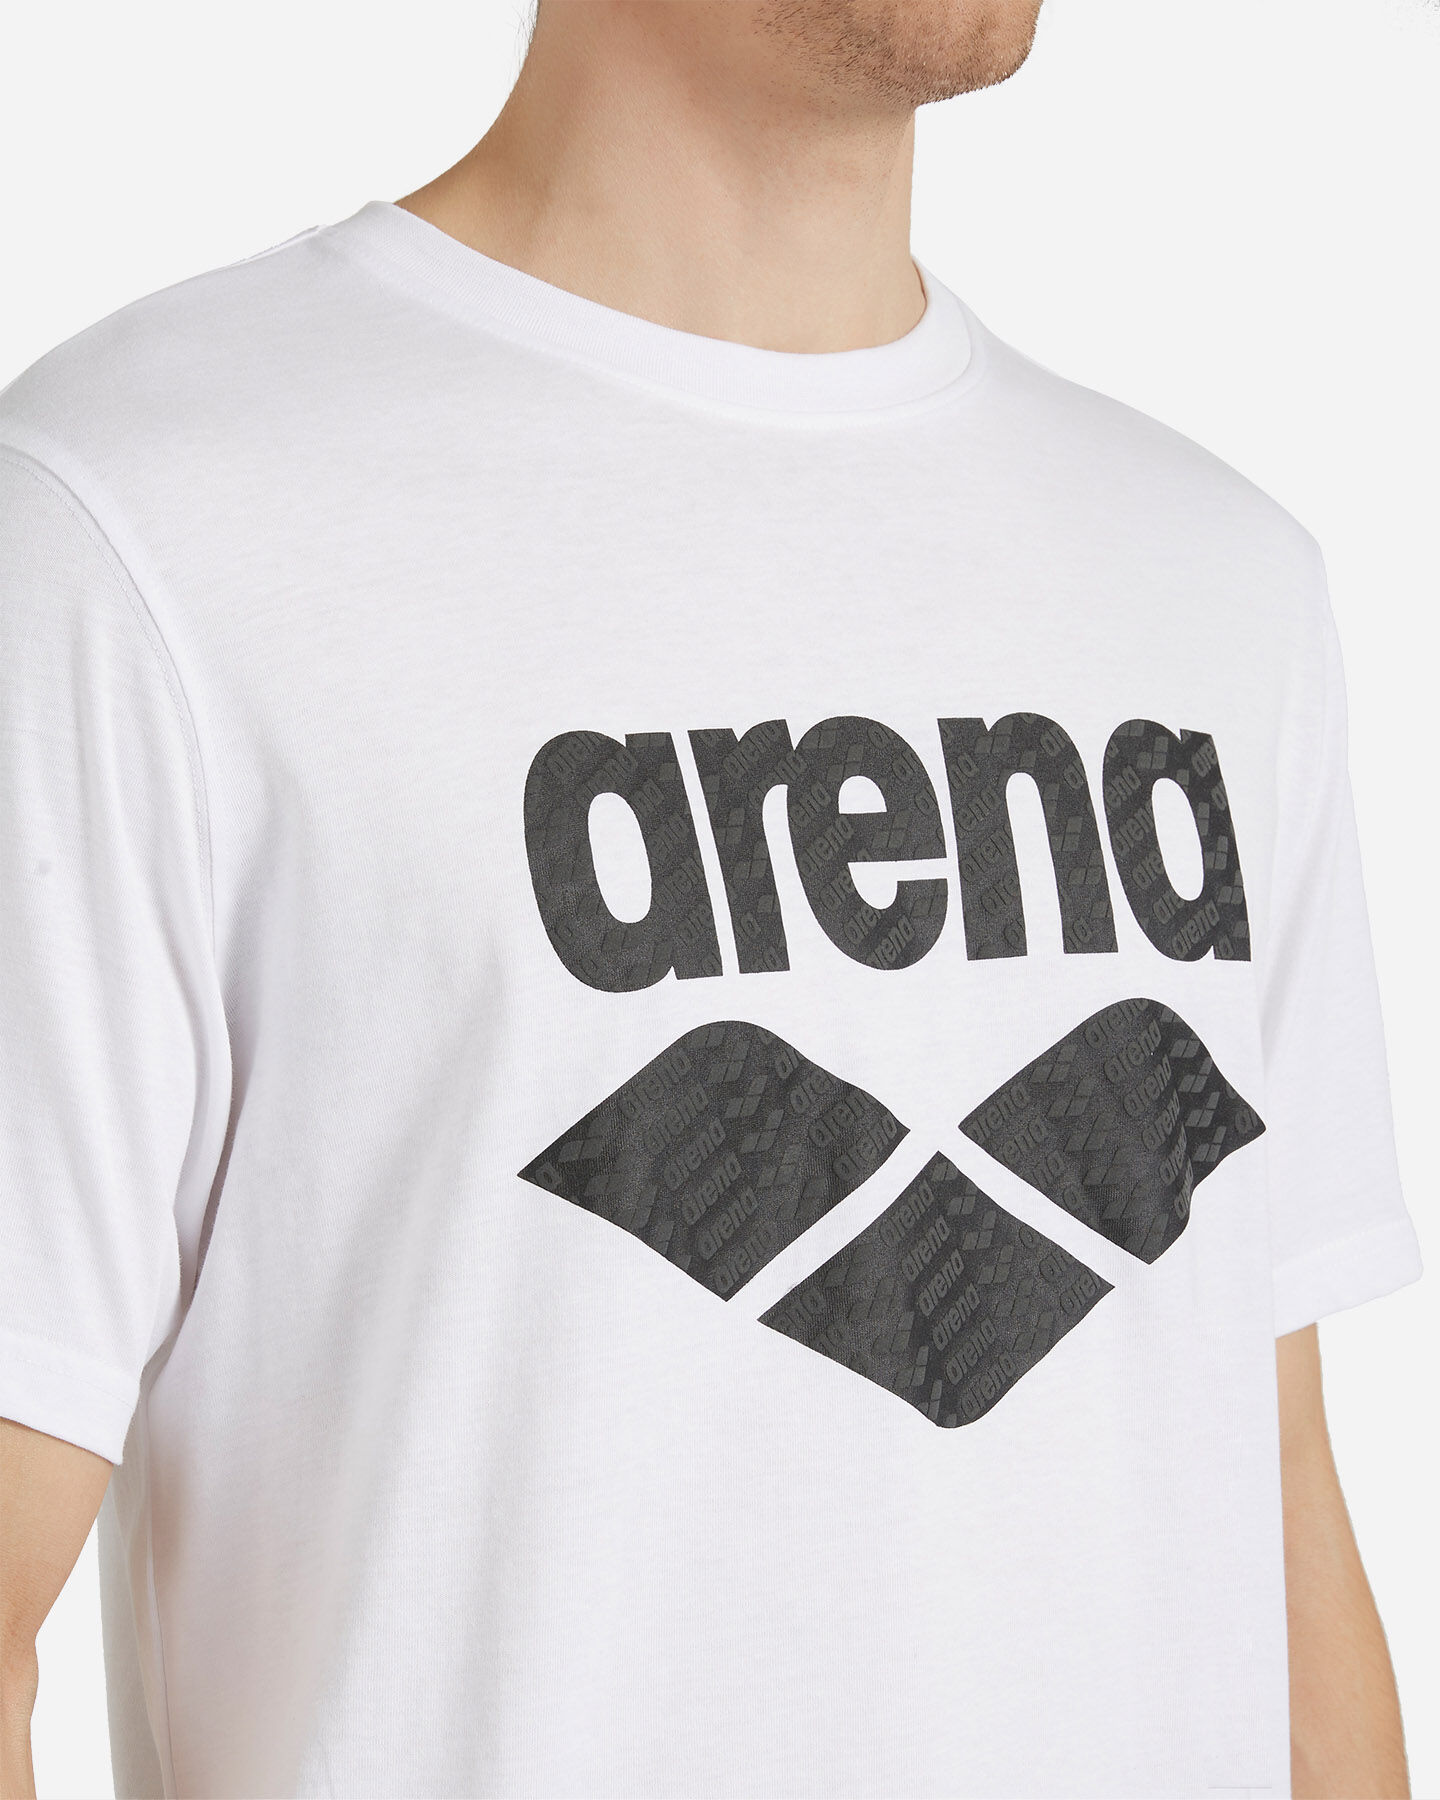  T-Shirt ARENA BIG LOGO PRINTED M S4087151|001|XS scatto 4